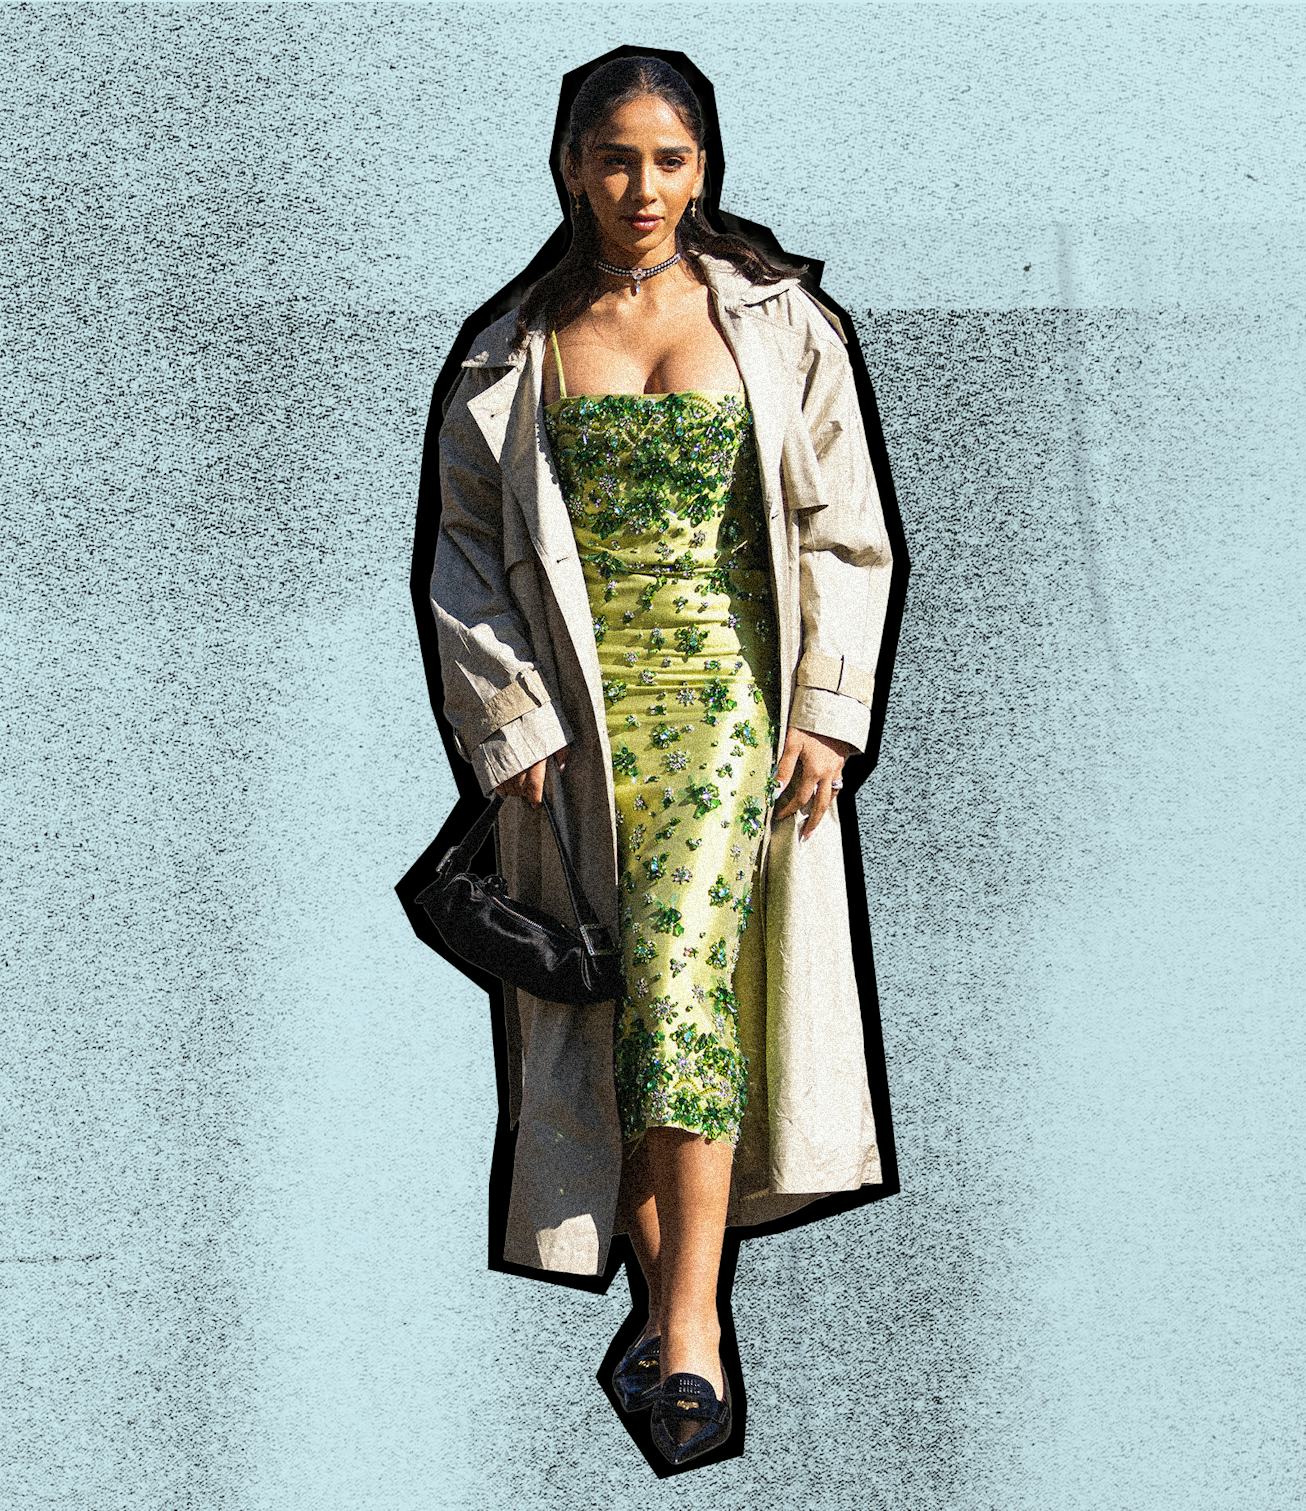 Female in a green vintage dress and white coat